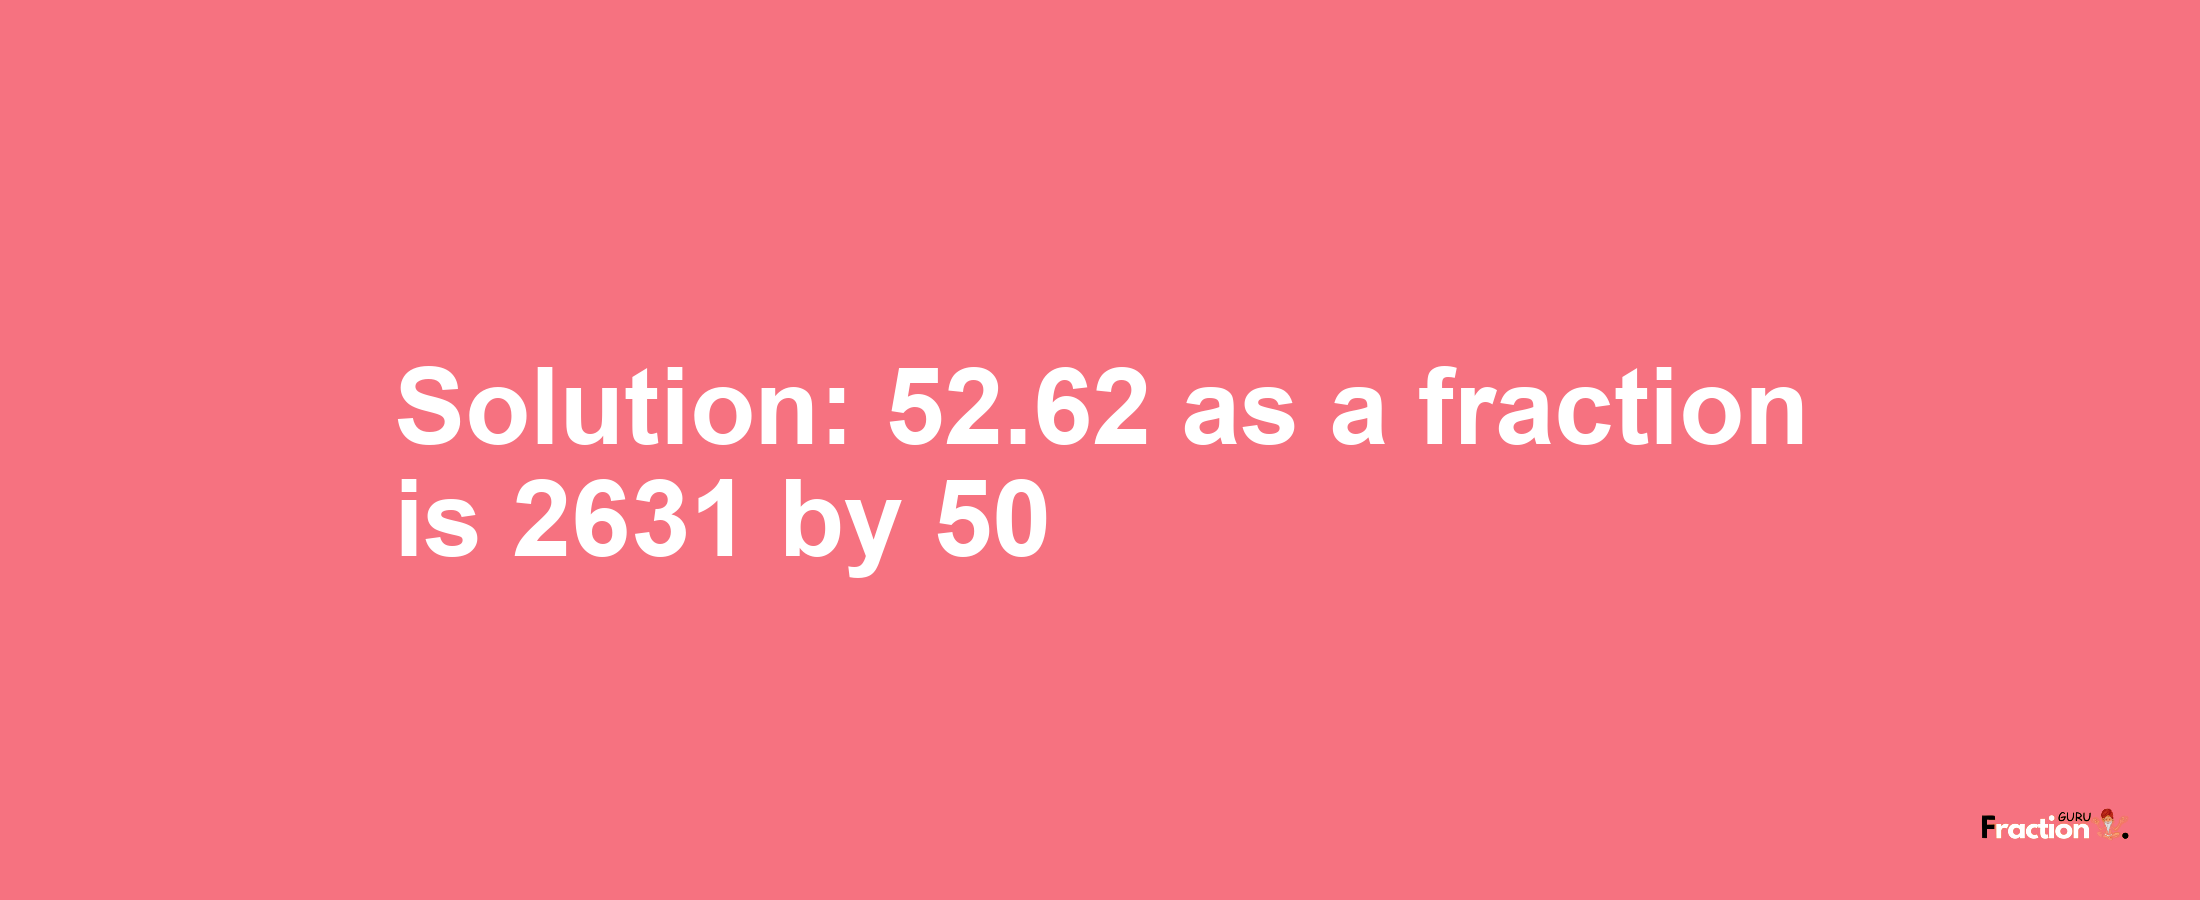 Solution:52.62 as a fraction is 2631/50